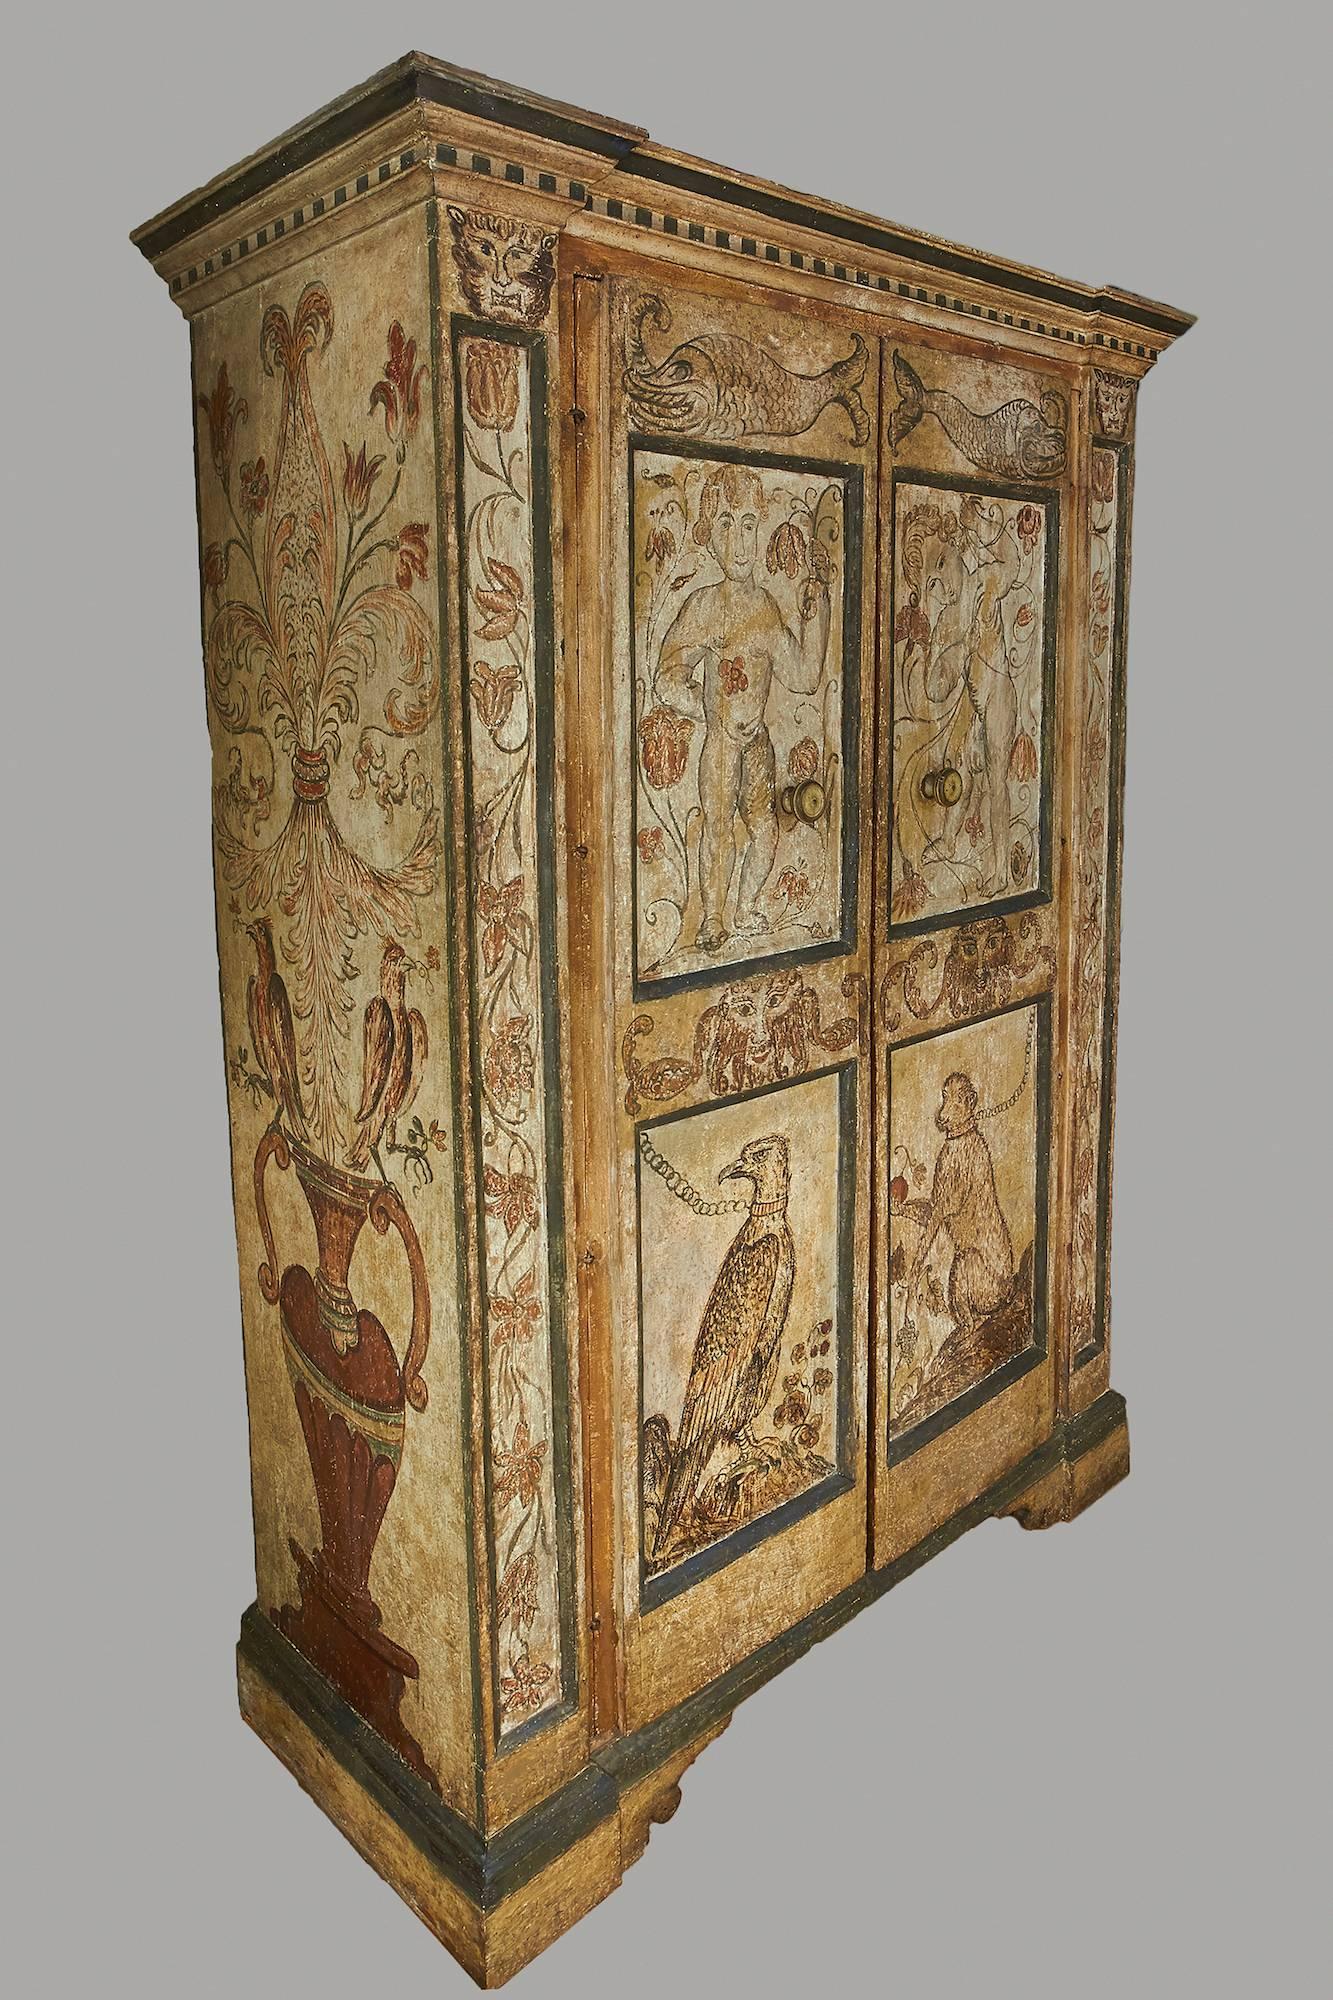 A wonderful cream and grey painted Italian Baroque period cupboard, the blue banded outset pediment with a painted trompe l'oeil dentil, over twin paneled doors headed by opposing ferocious fish above figures of boys entwined in floral vines, the